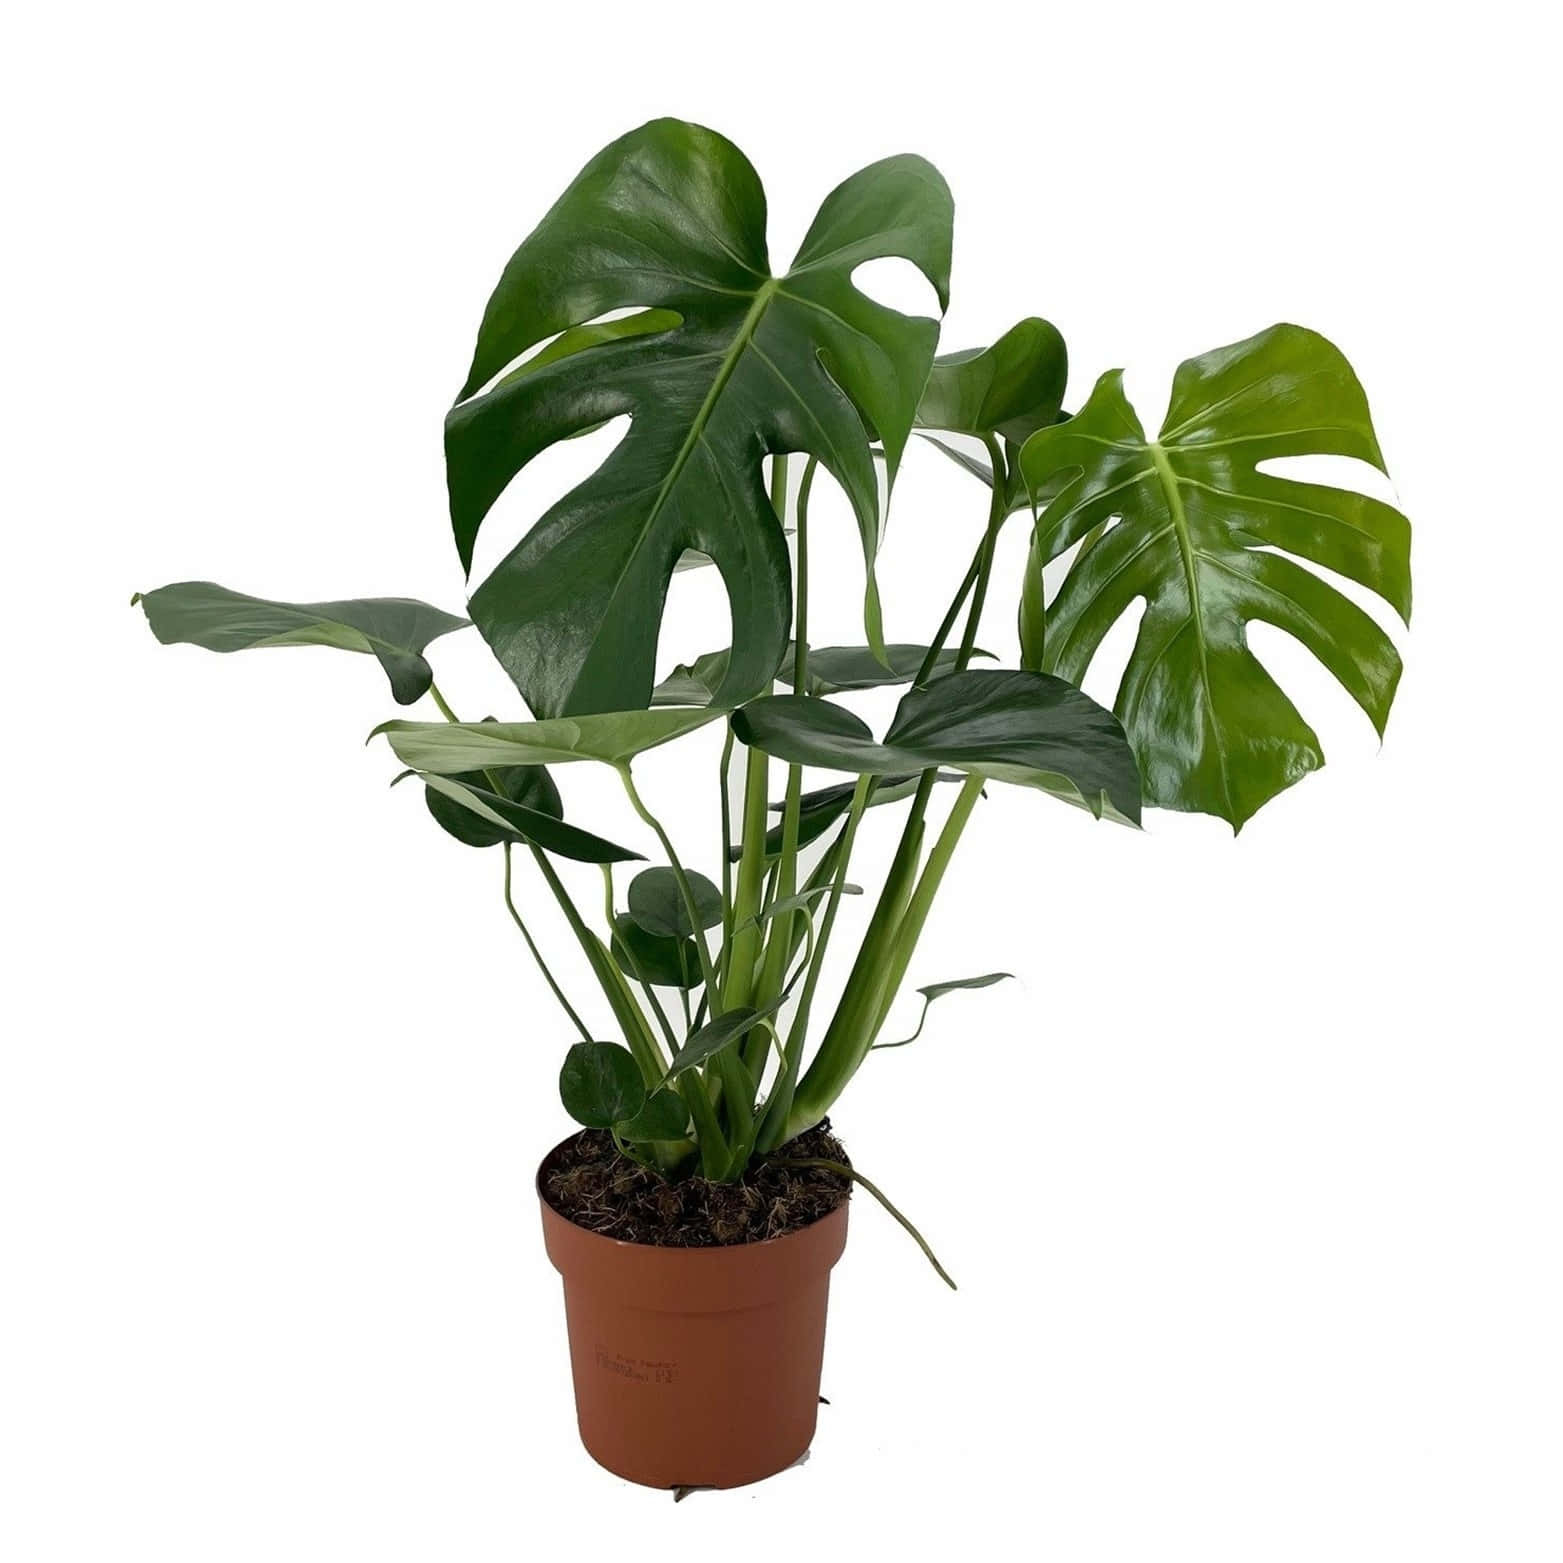 A Large Monstera Plant In A Pot